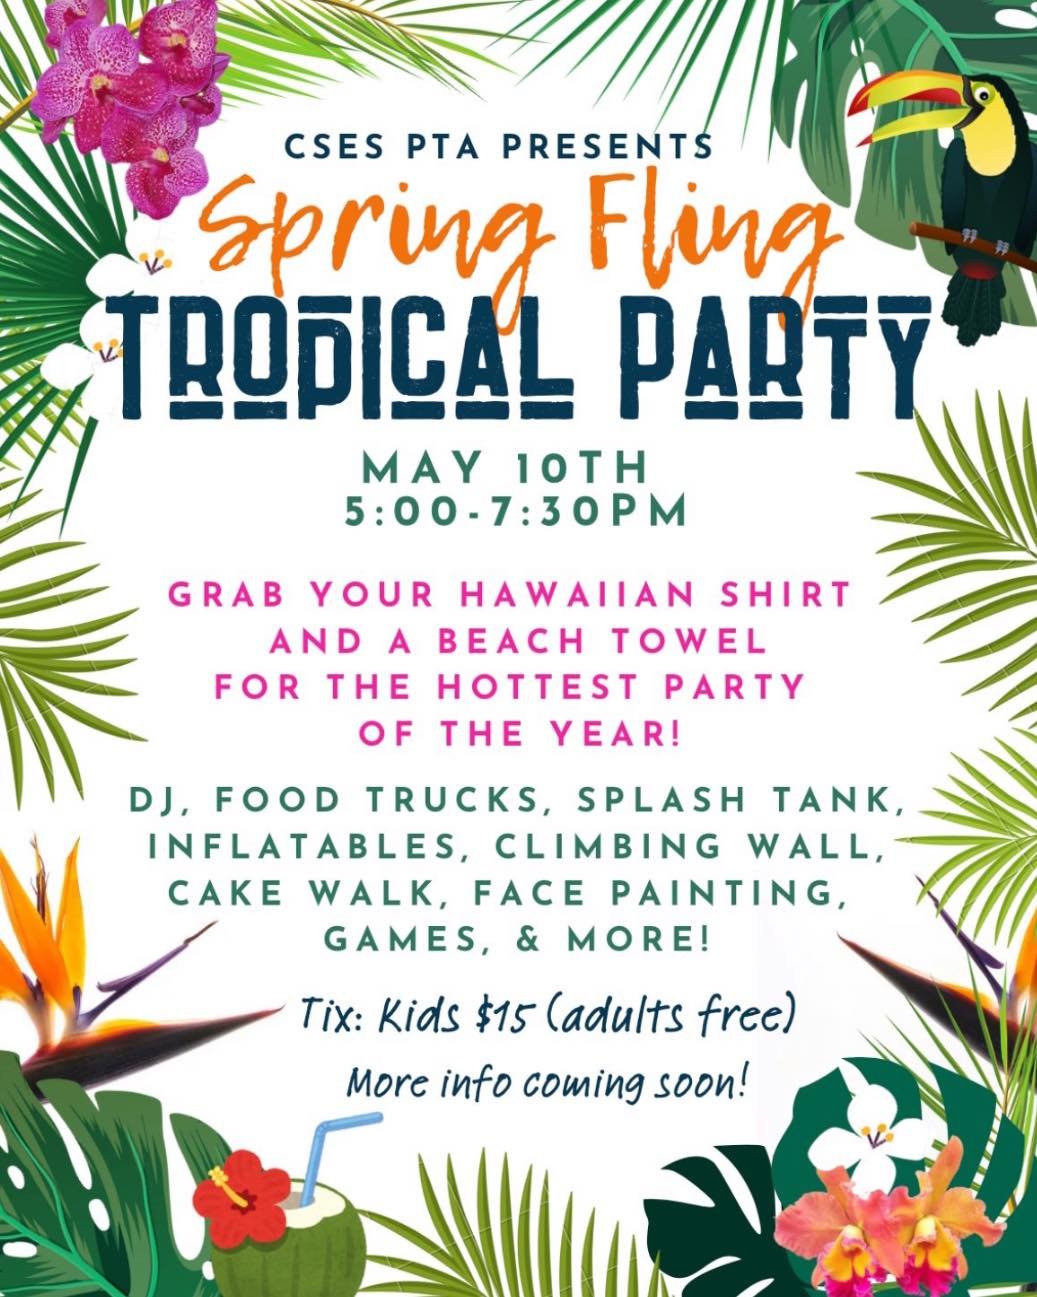 🌺🌴 Get ready to hula at our Spring Fling Tropical Party on Friday, May 10th, from 5:00-7:30pm! 🌴🌺

Join us for the hottest party of the year with a DJ, Food Trucks, Splash Tank, Inflatables, Climbing Wall, Cake Walk, Face Painting, Games, and our